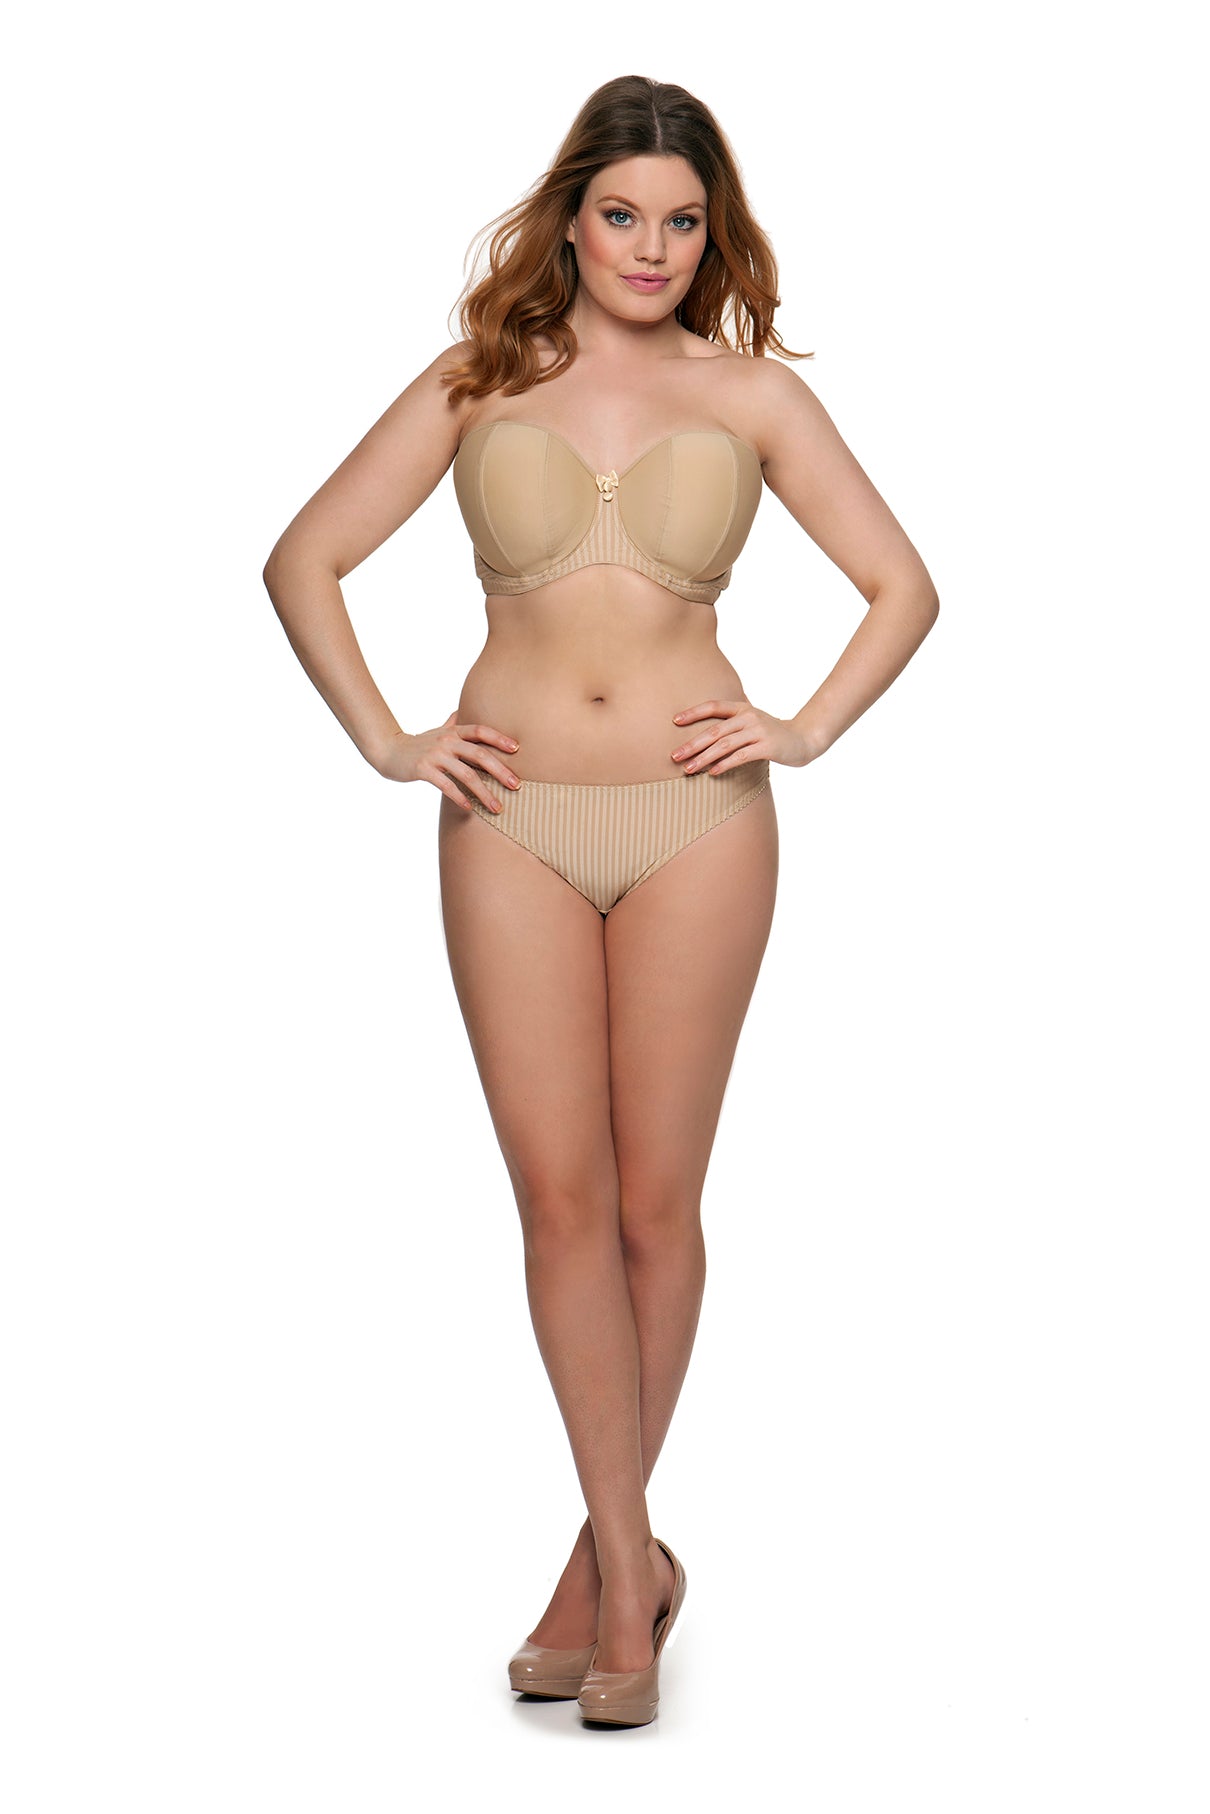 Curvy Kate Luxe Strapless Bra CK2601 Women's Underwired Padded